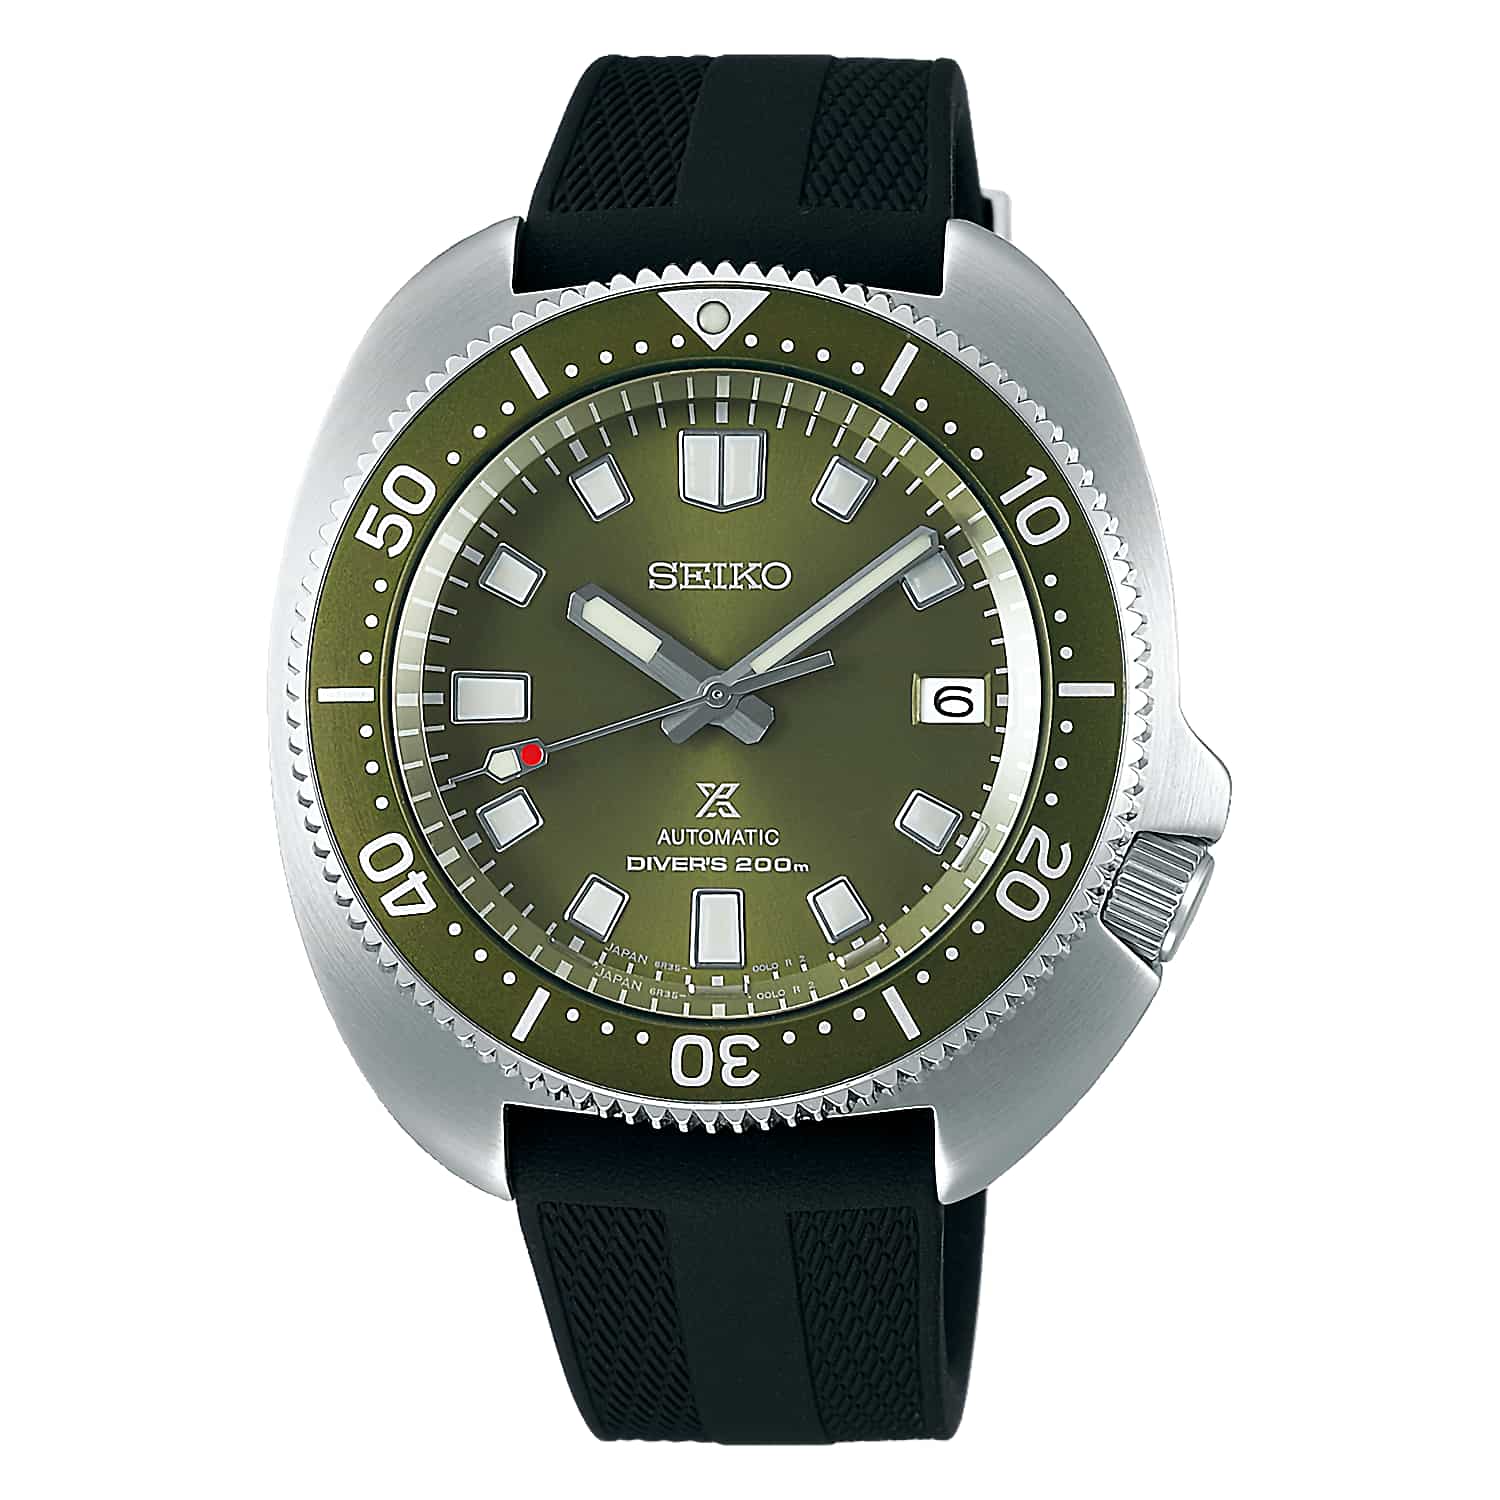 SPB153J1 SEIKO Prospex Automatic Divers Captain Willard Watch. Seiko Prospex challenges every limit, with a collection of timepieces for sports lovers and adventure seekers whether in the water, in the sky or on land. Since launching Japan’s first diver’s